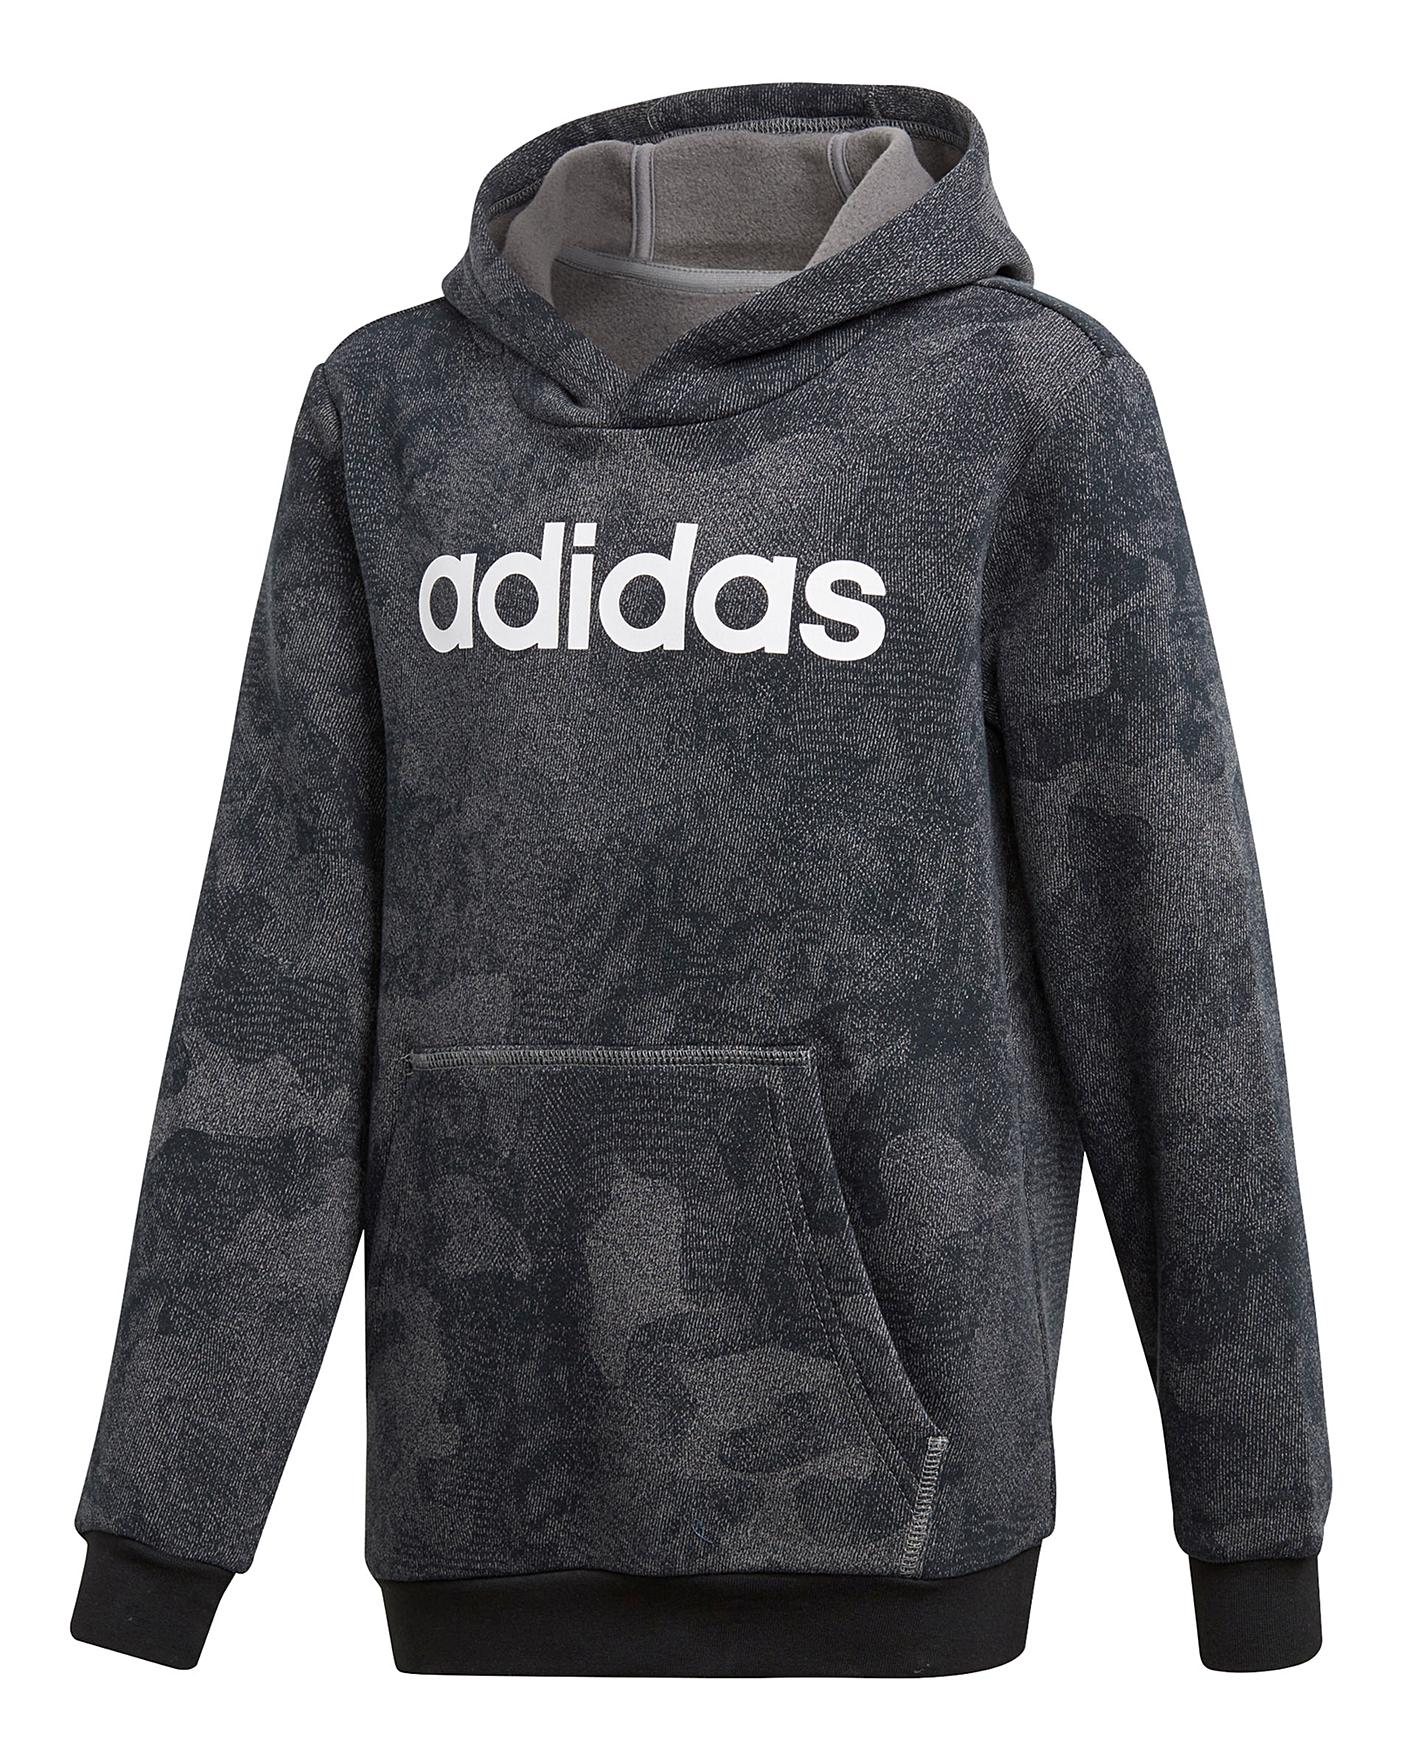 adidas Youth Boy Linear Hoodie | The Kids Division